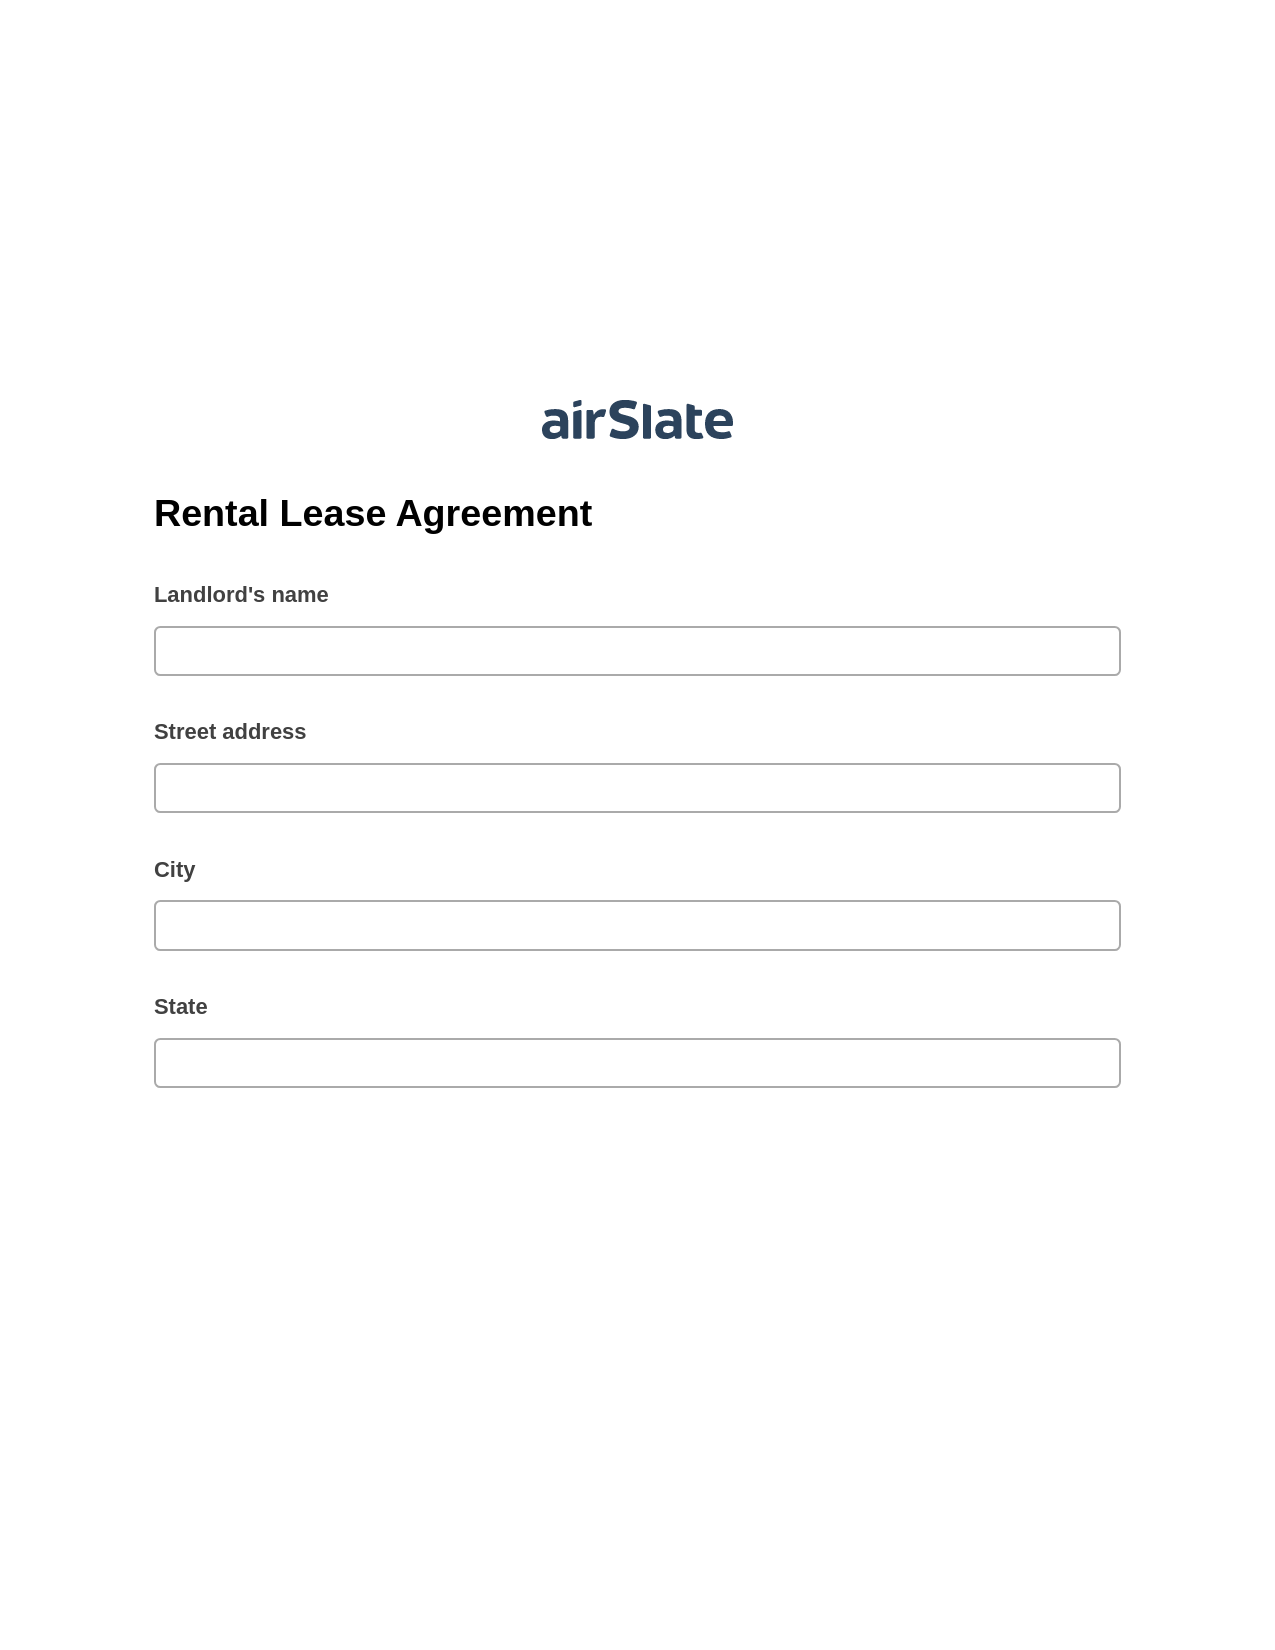 Rental Lease Agreement Pre-fill from CSV File Bot, Update NetSuite Records Bot, Export to MySQL Bot